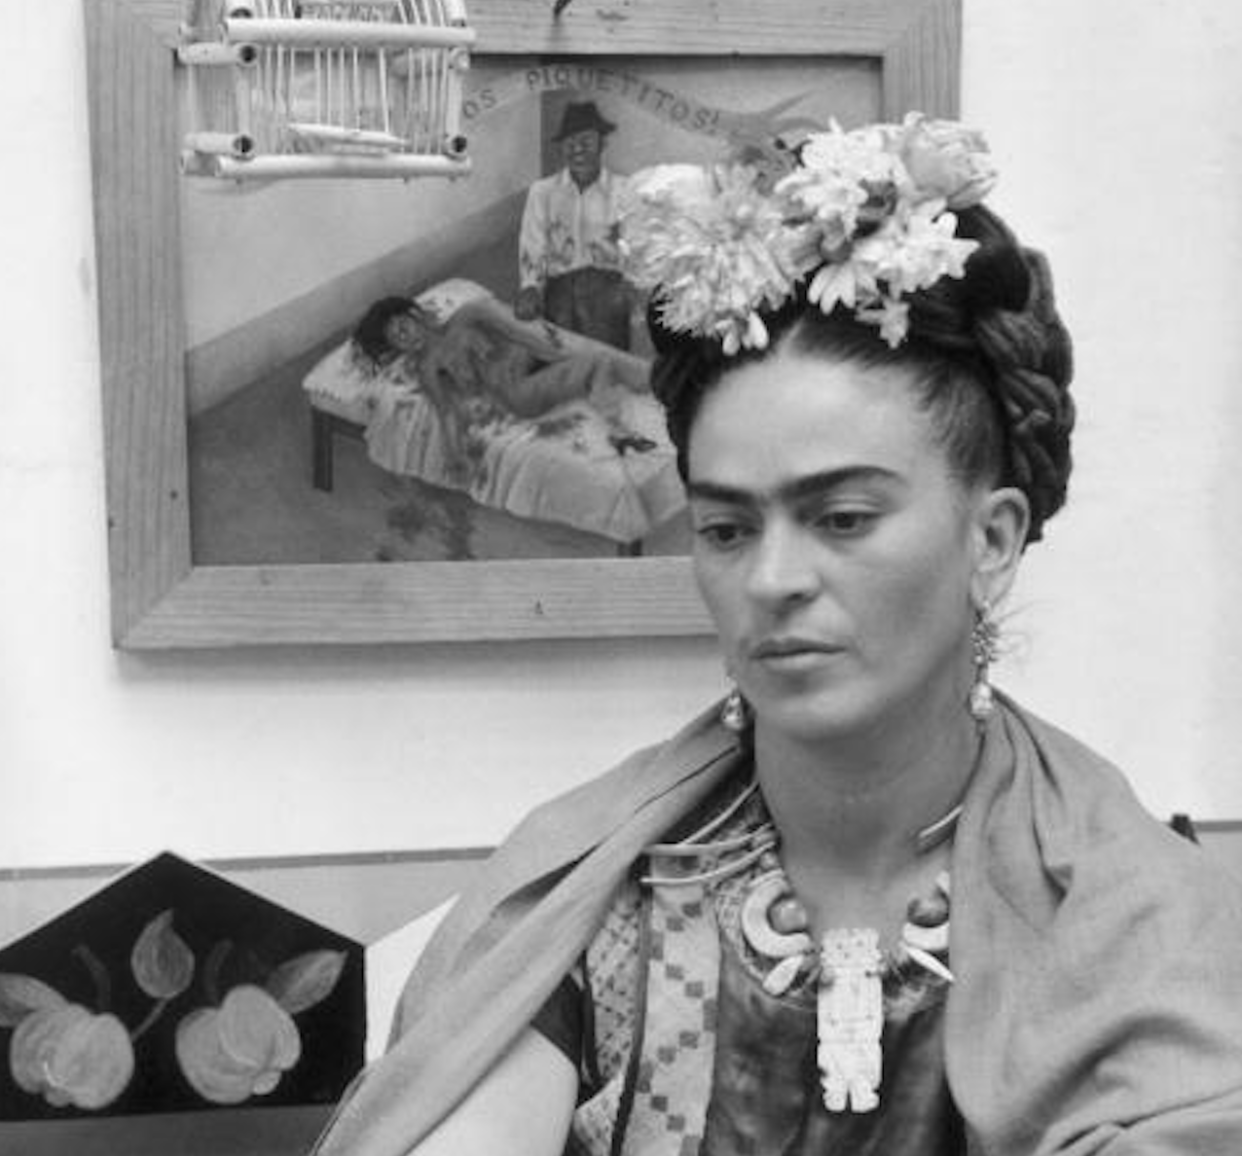 This Brazilian artist created Frida Kahlo’s face from clay in the most mesmerizing way